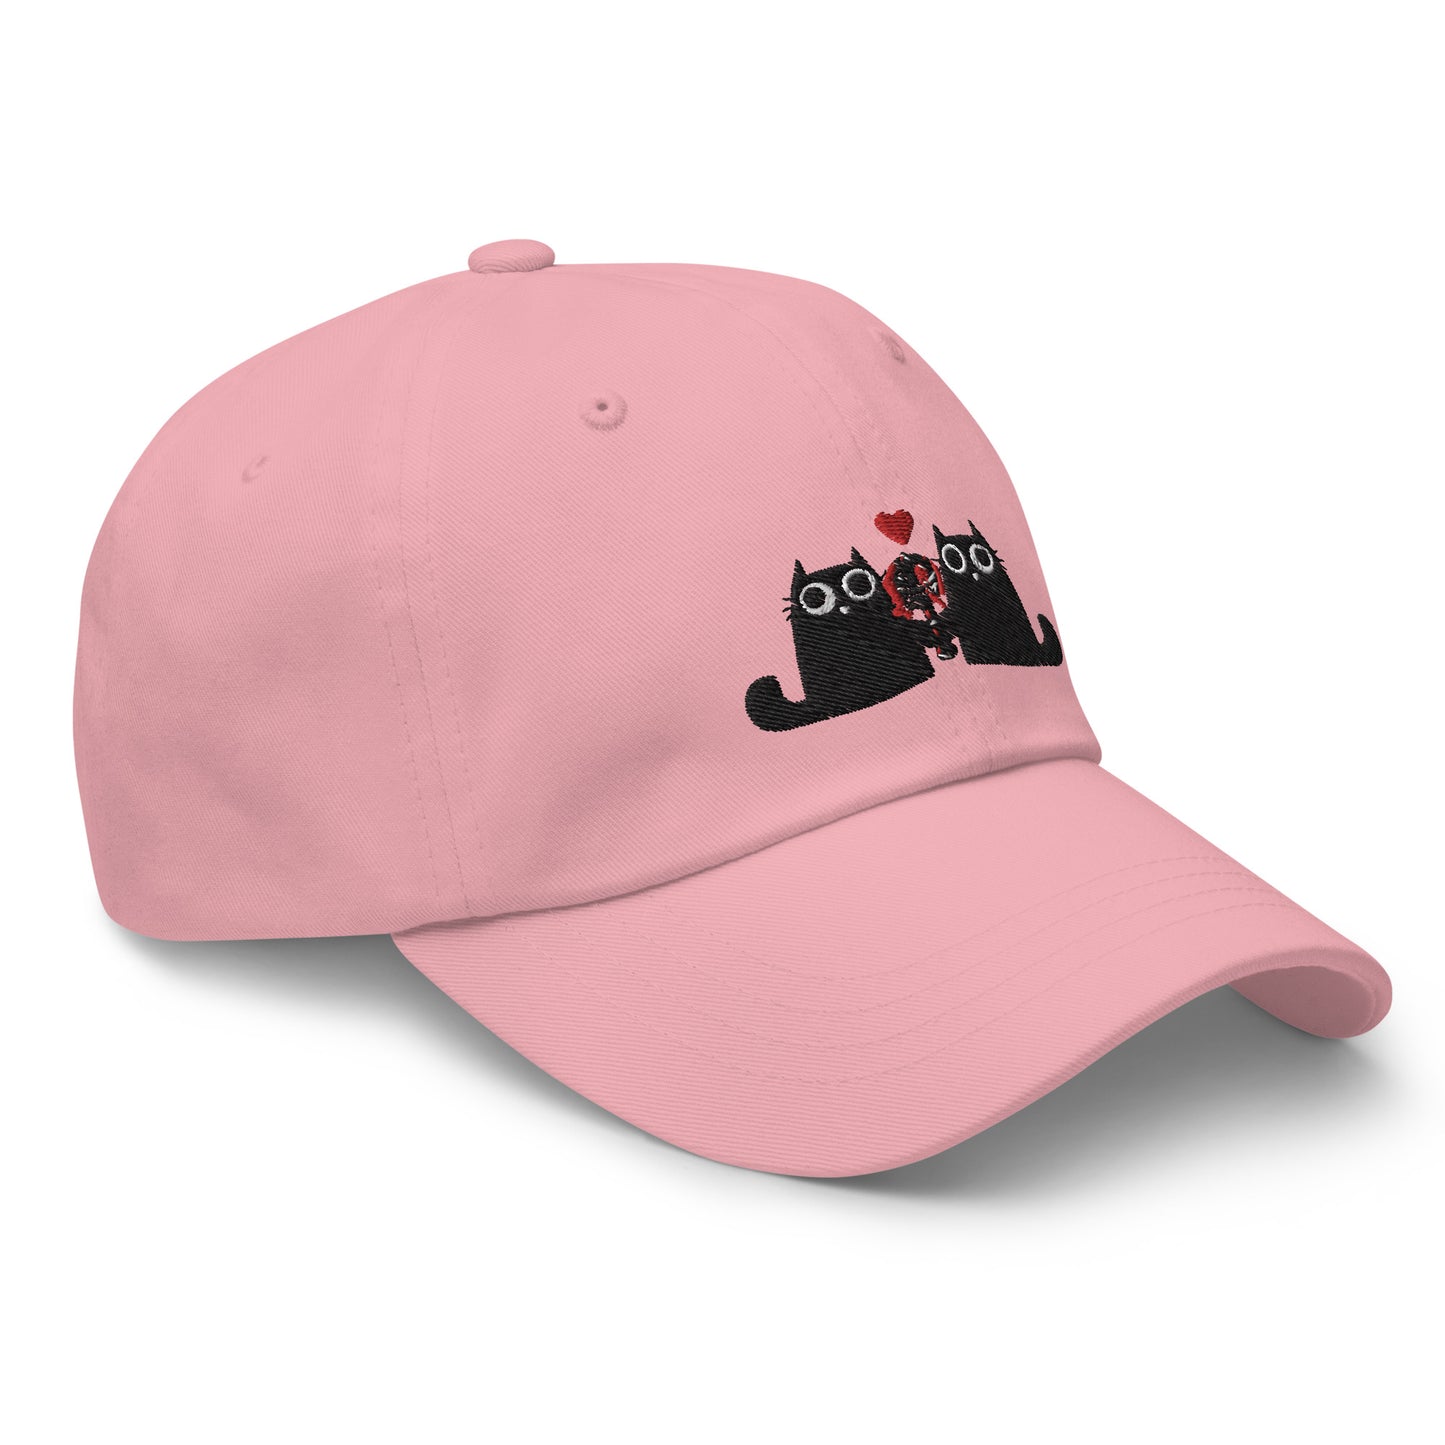 Thorn - Partners in Crime - Dad hat